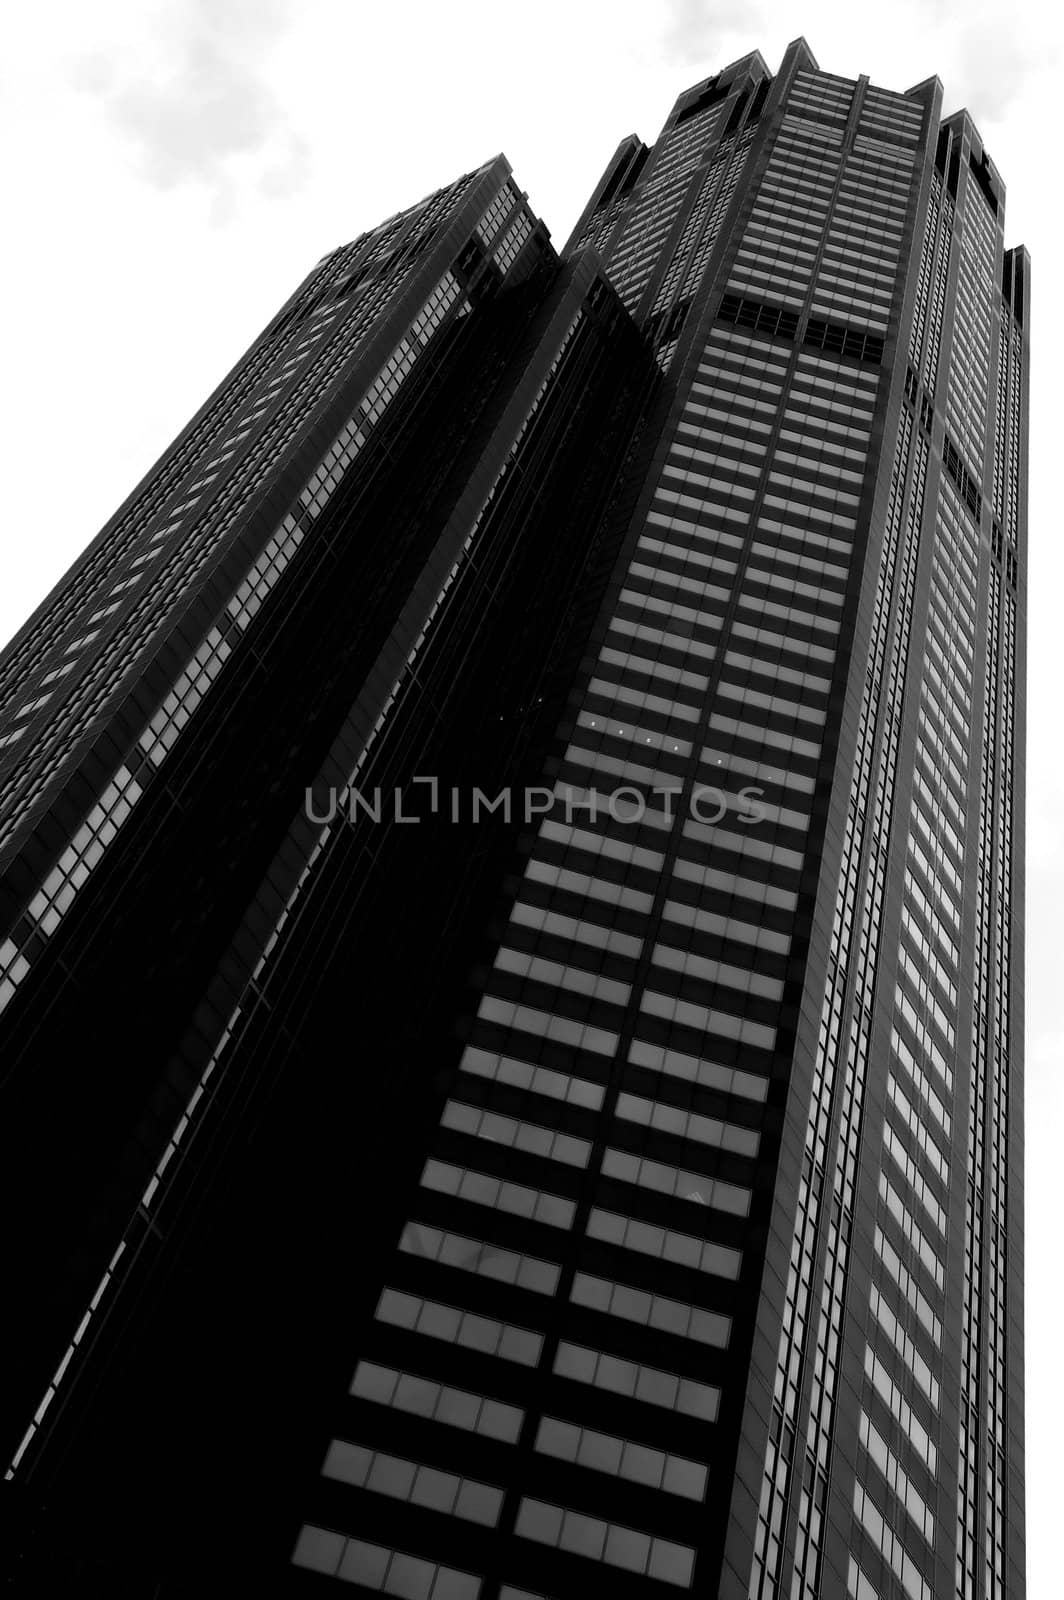 Chicago Architecture by eugenef